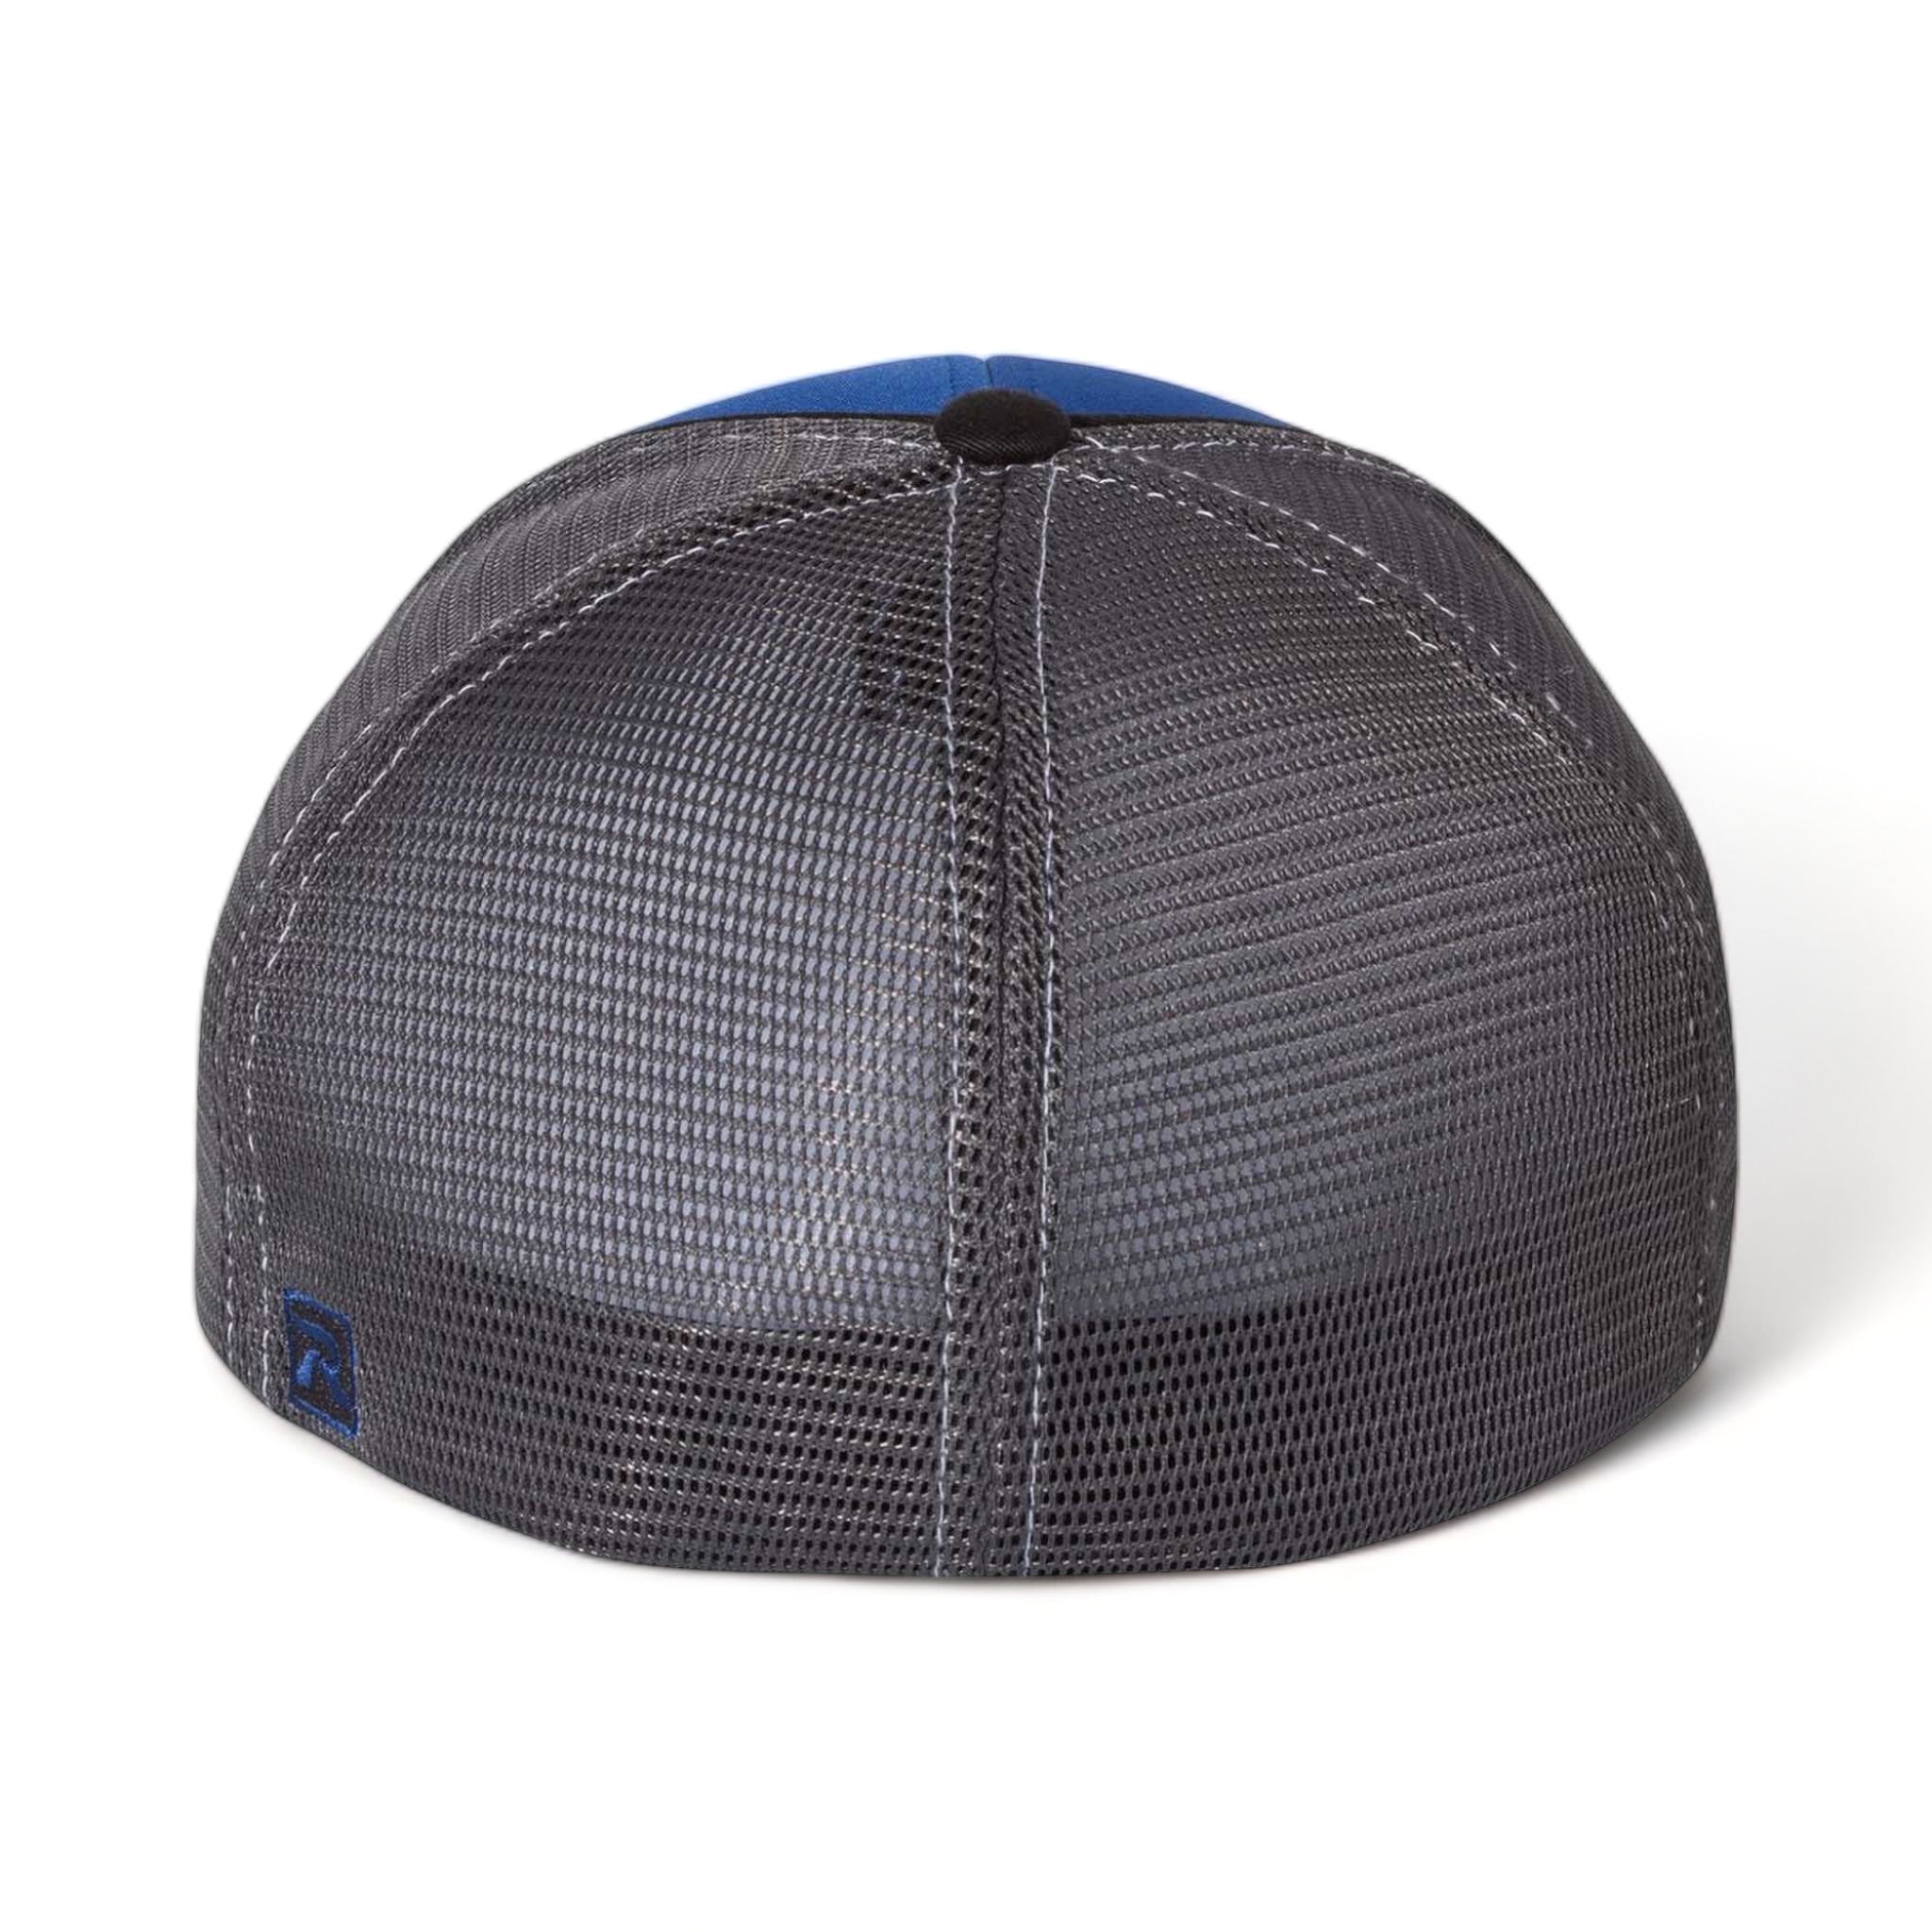 Back view of Richardson 172 custom hat in royal, charcoal and black tri